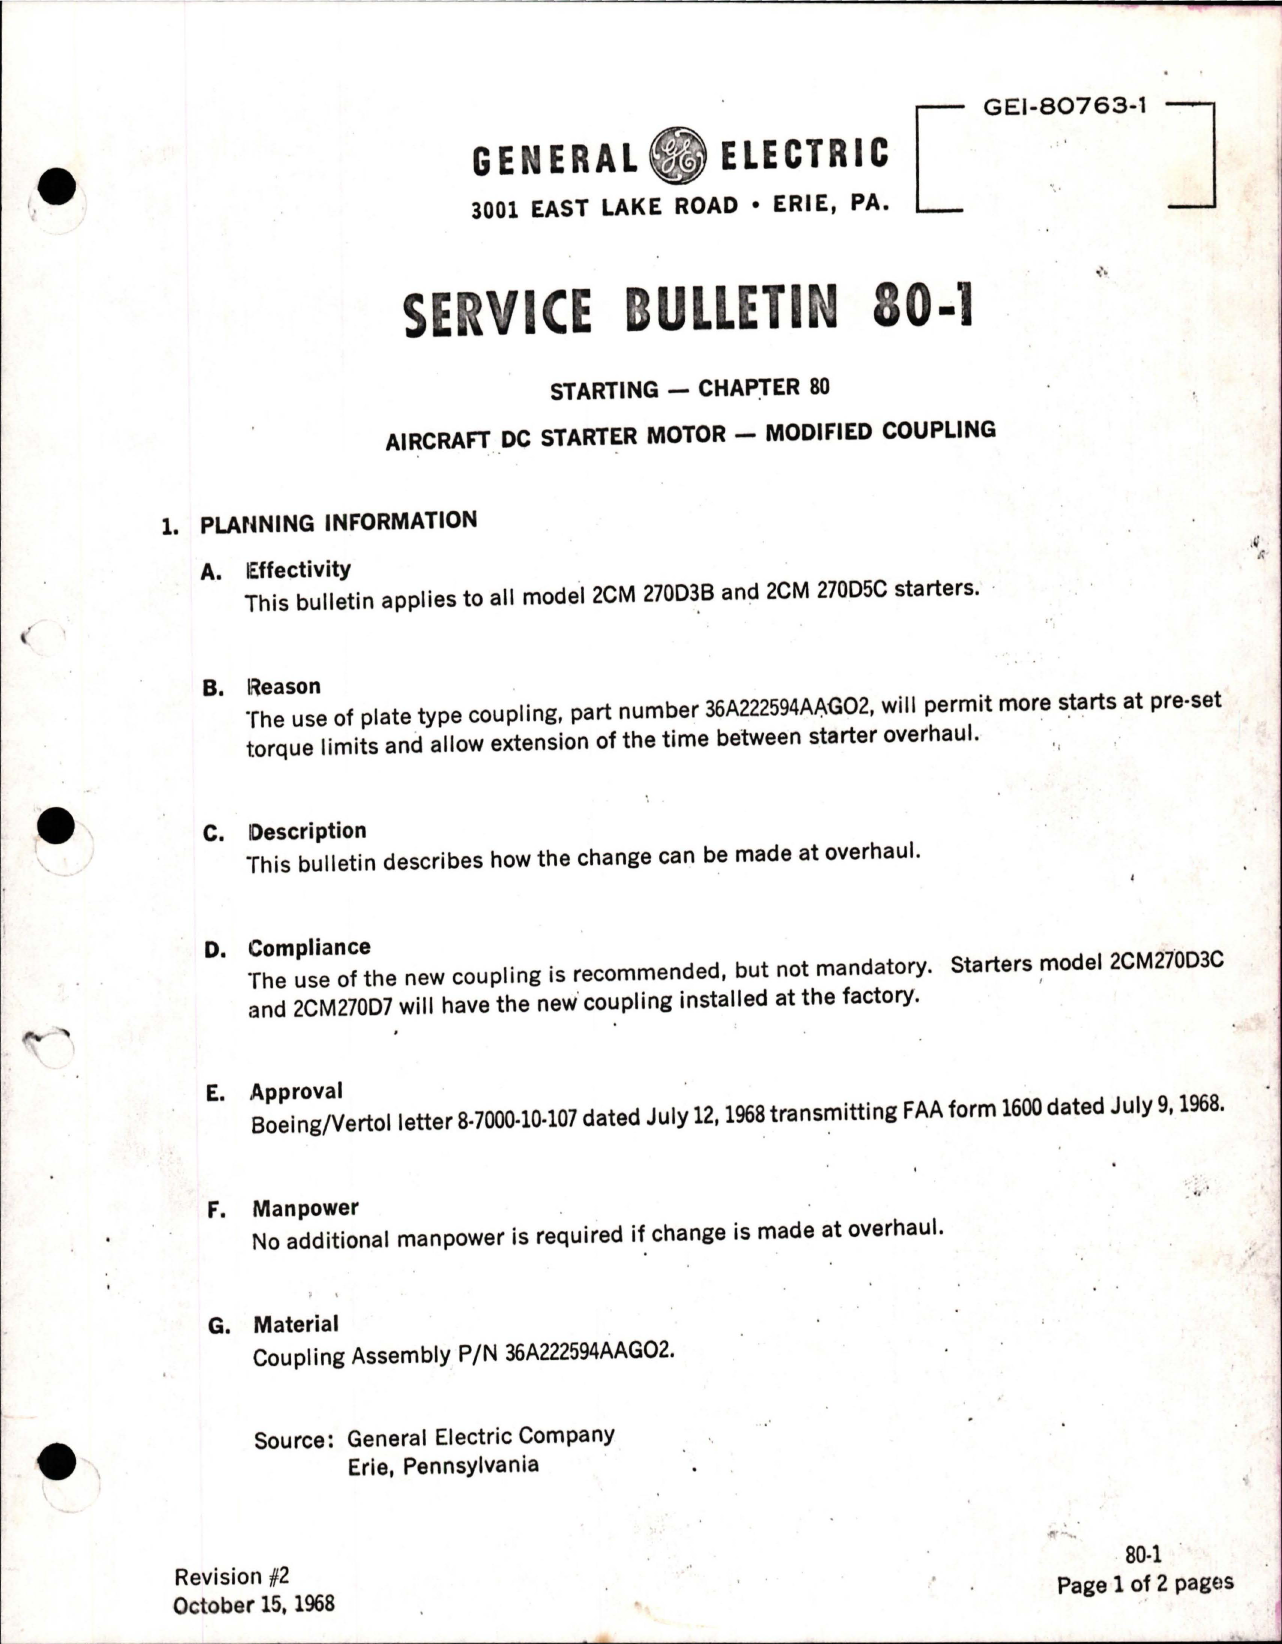 Sample page 1 from AirCorps Library document: Aircraft DC Starter Motor - Modified Coupling 